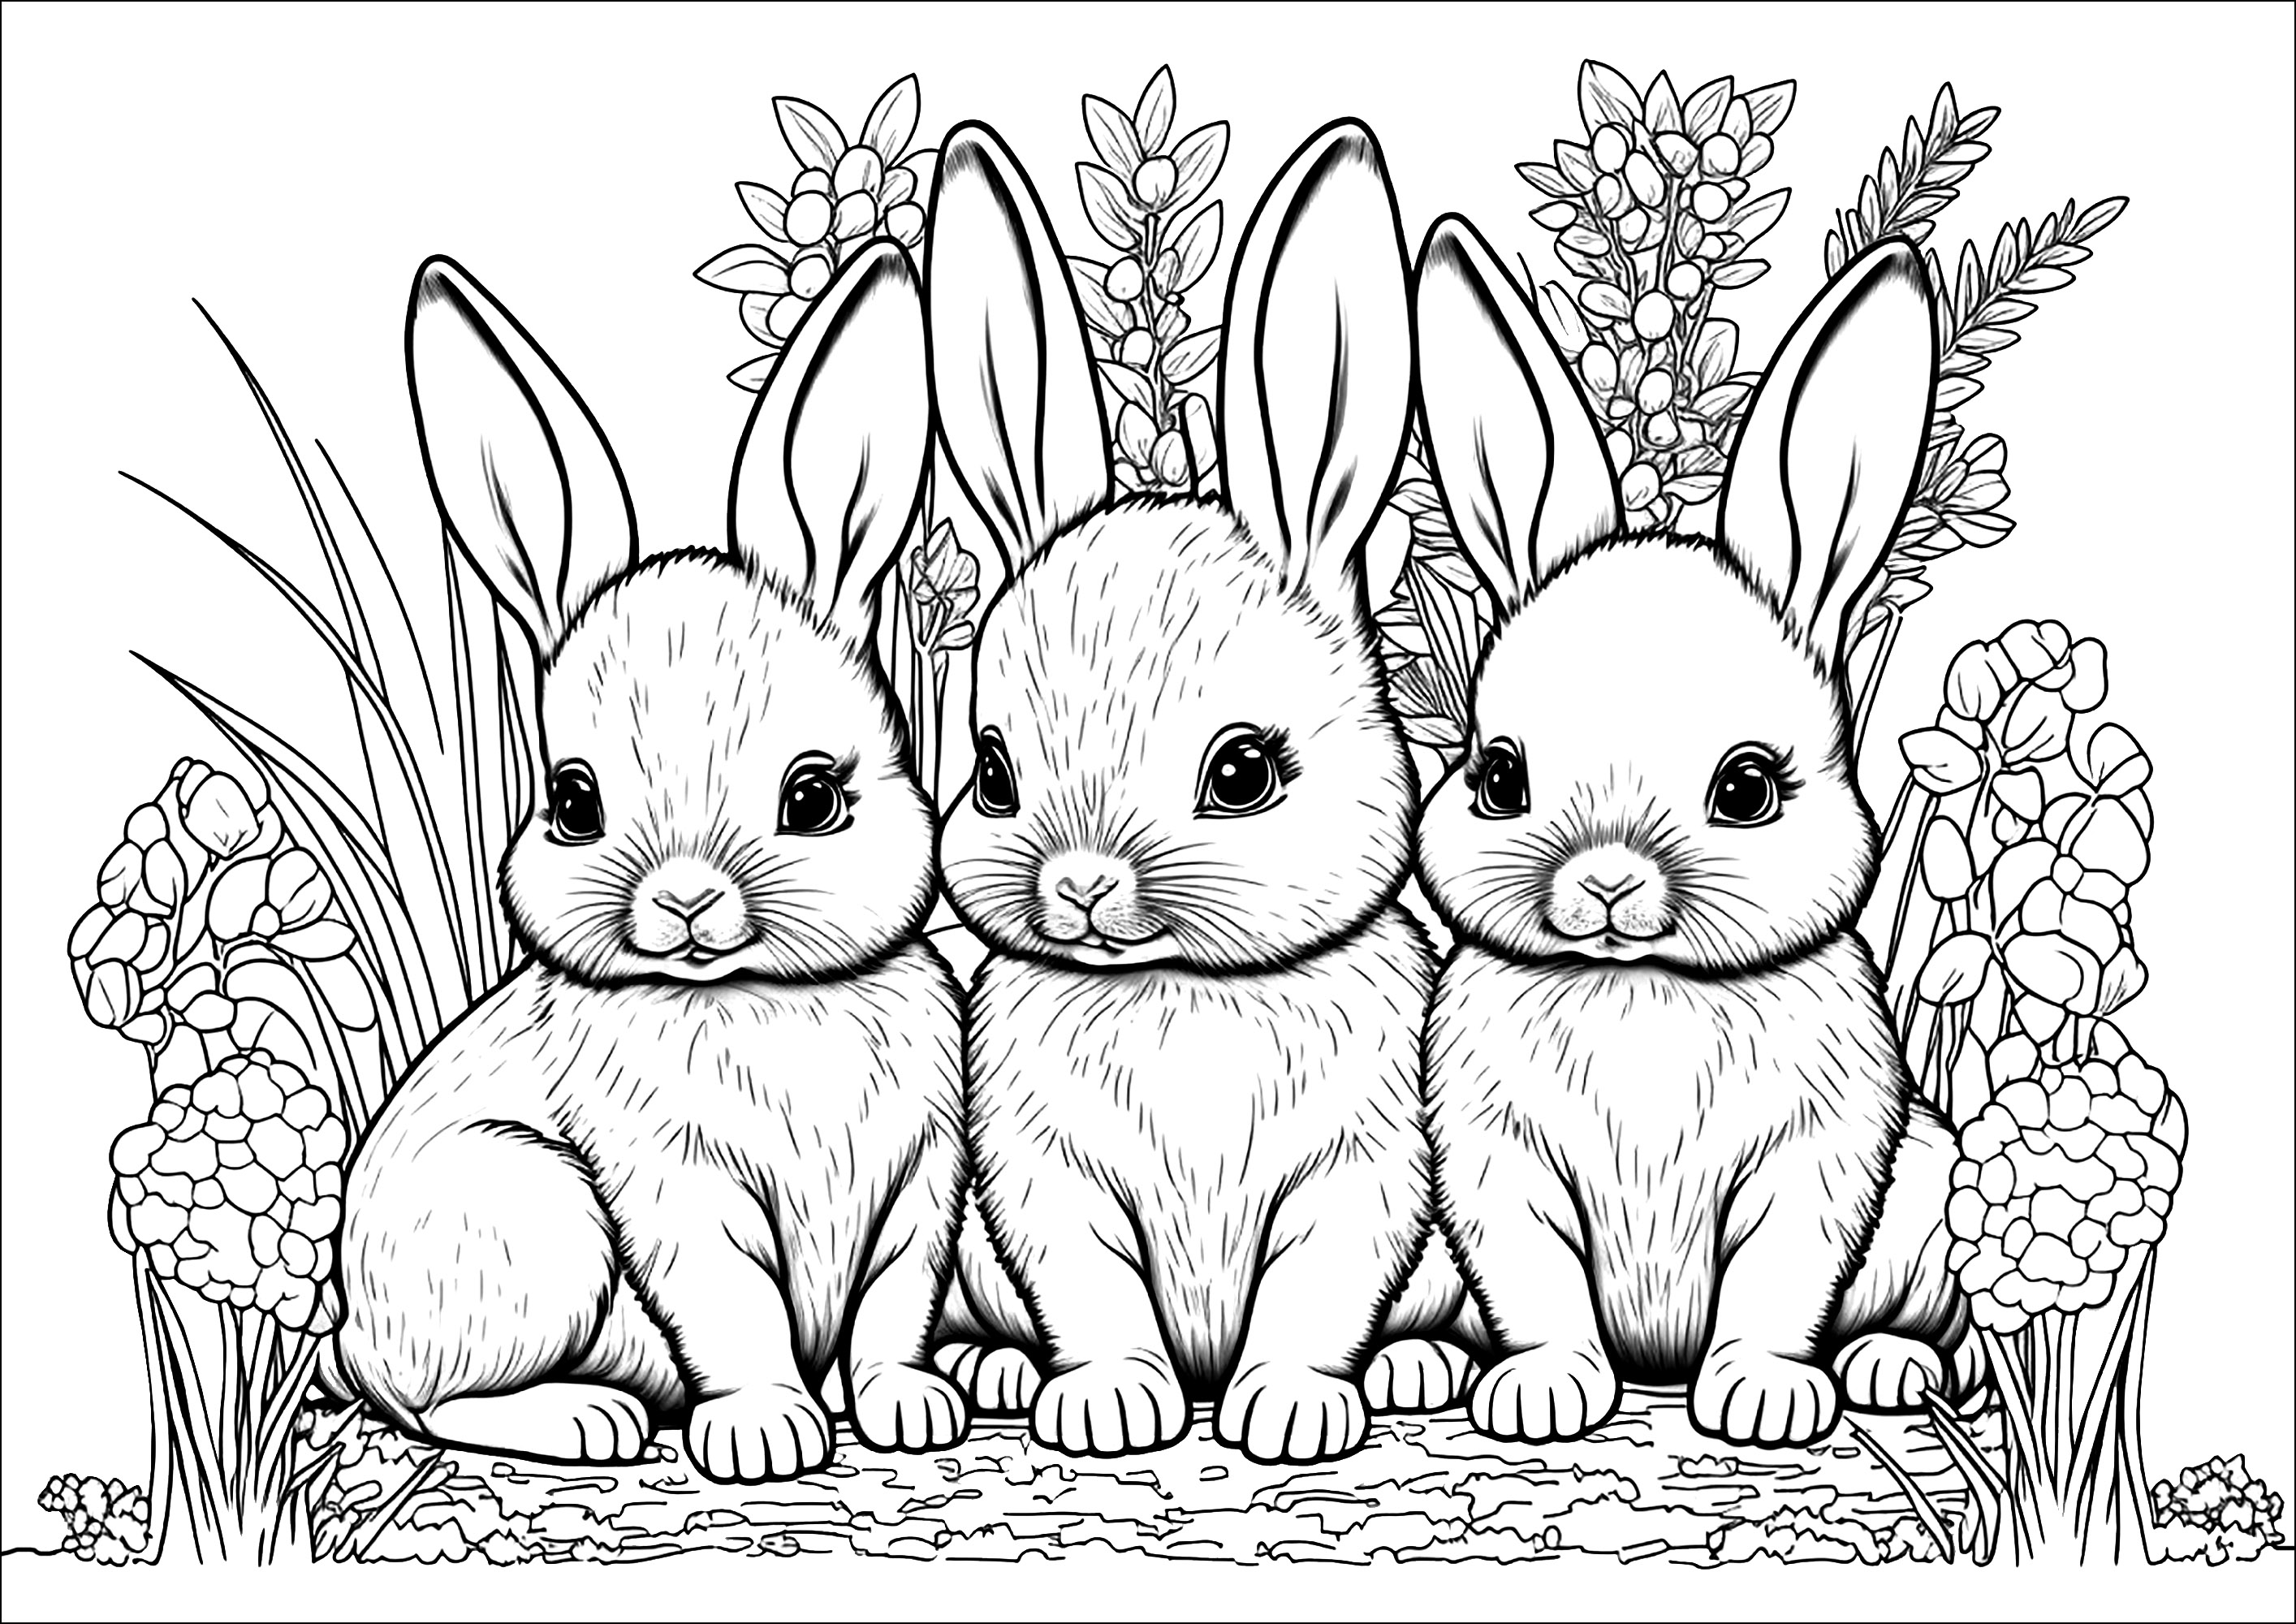 Cute bunnies to color, sitting quietly in front of a flowerbed. The bunnies are very realistic, and the flowers are very detailed and varied.